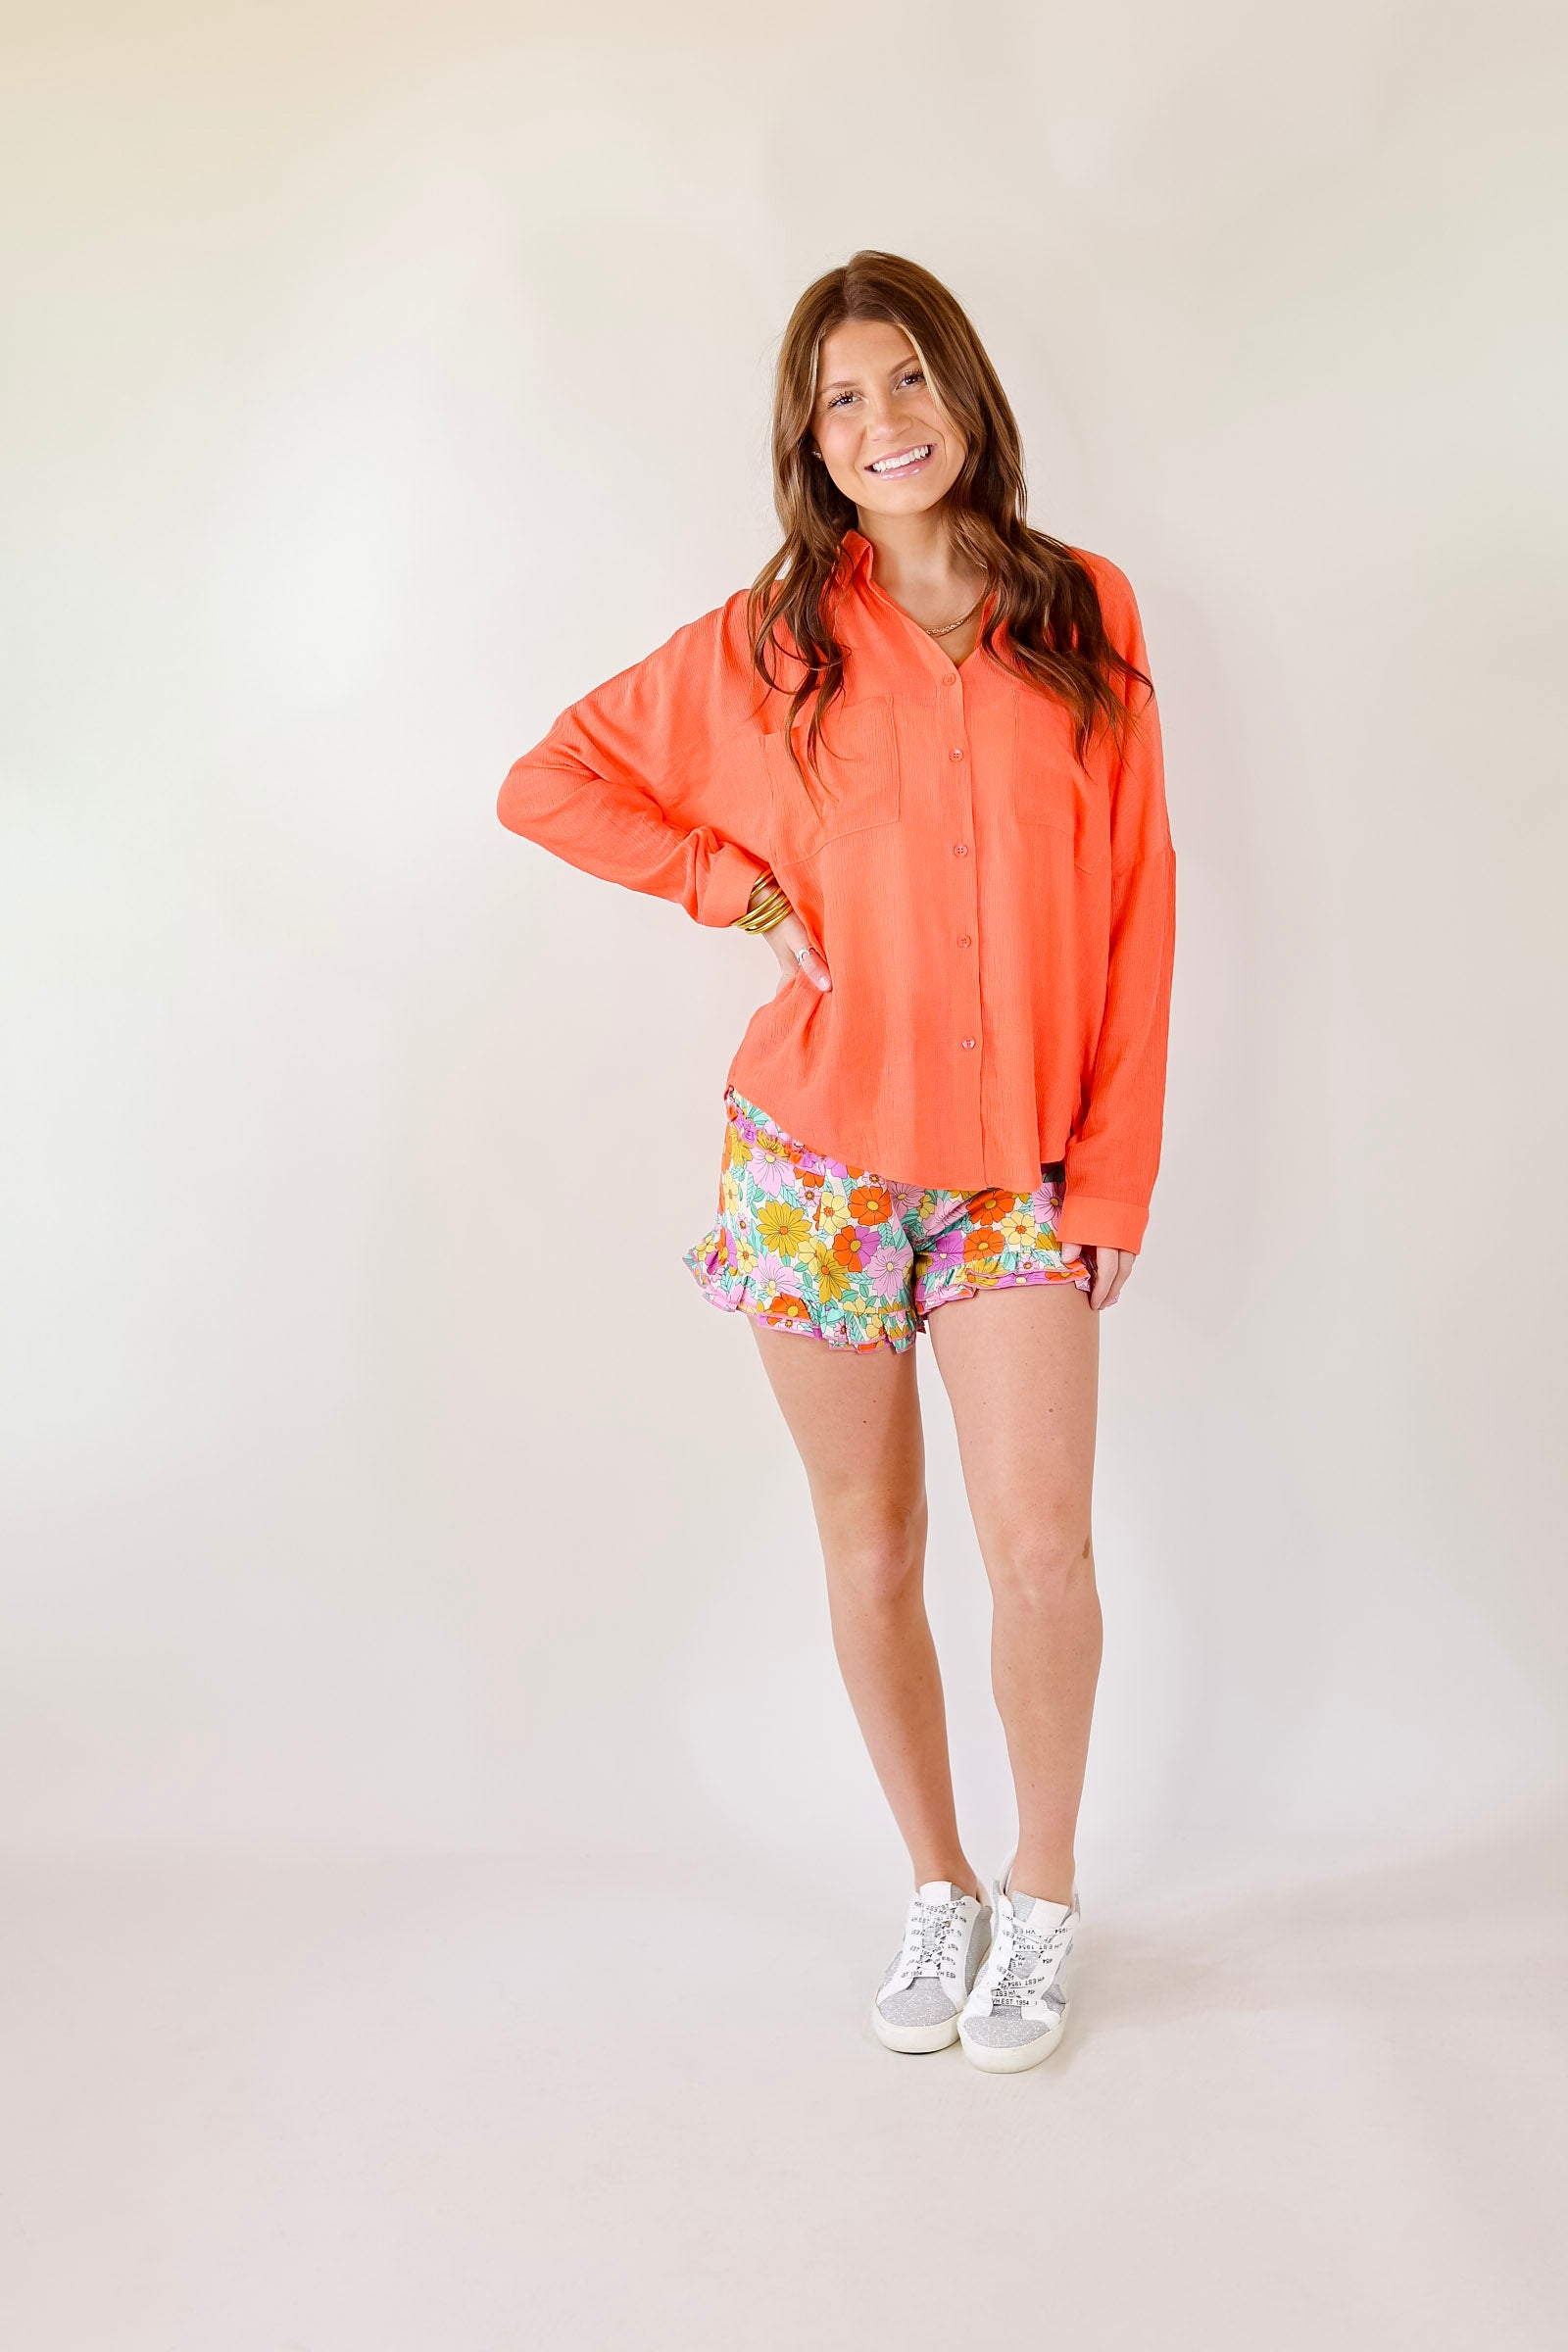 Pretty Days Floral Print and Ruffle Detail Shorts in Cream - Giddy Up Glamour Boutique